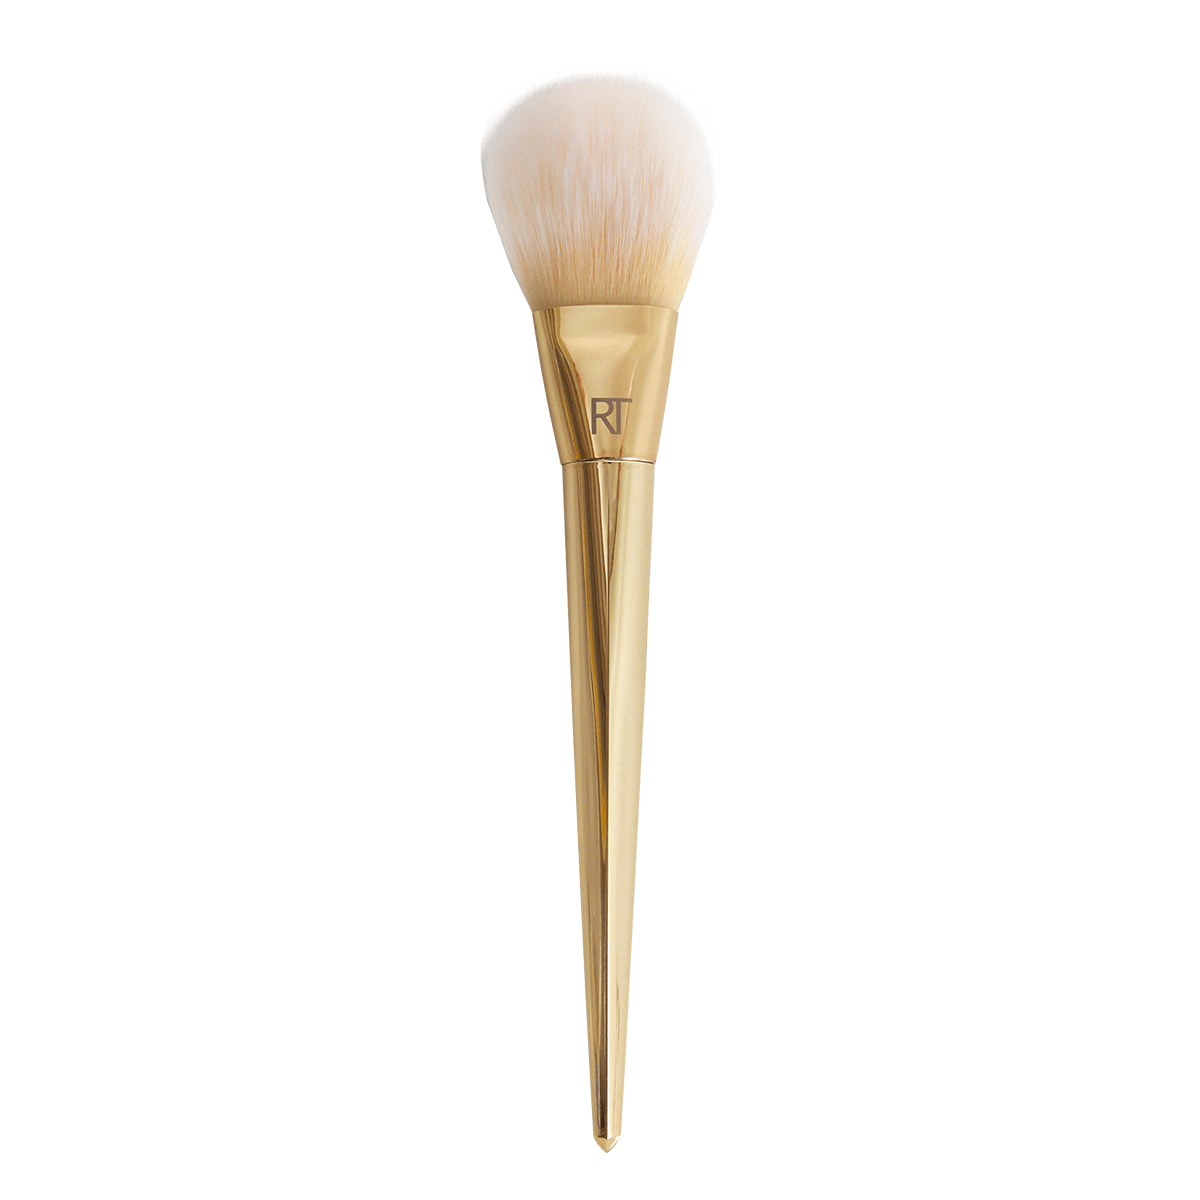 Real Techniques Bold Metals 100 Arched Powder Brush